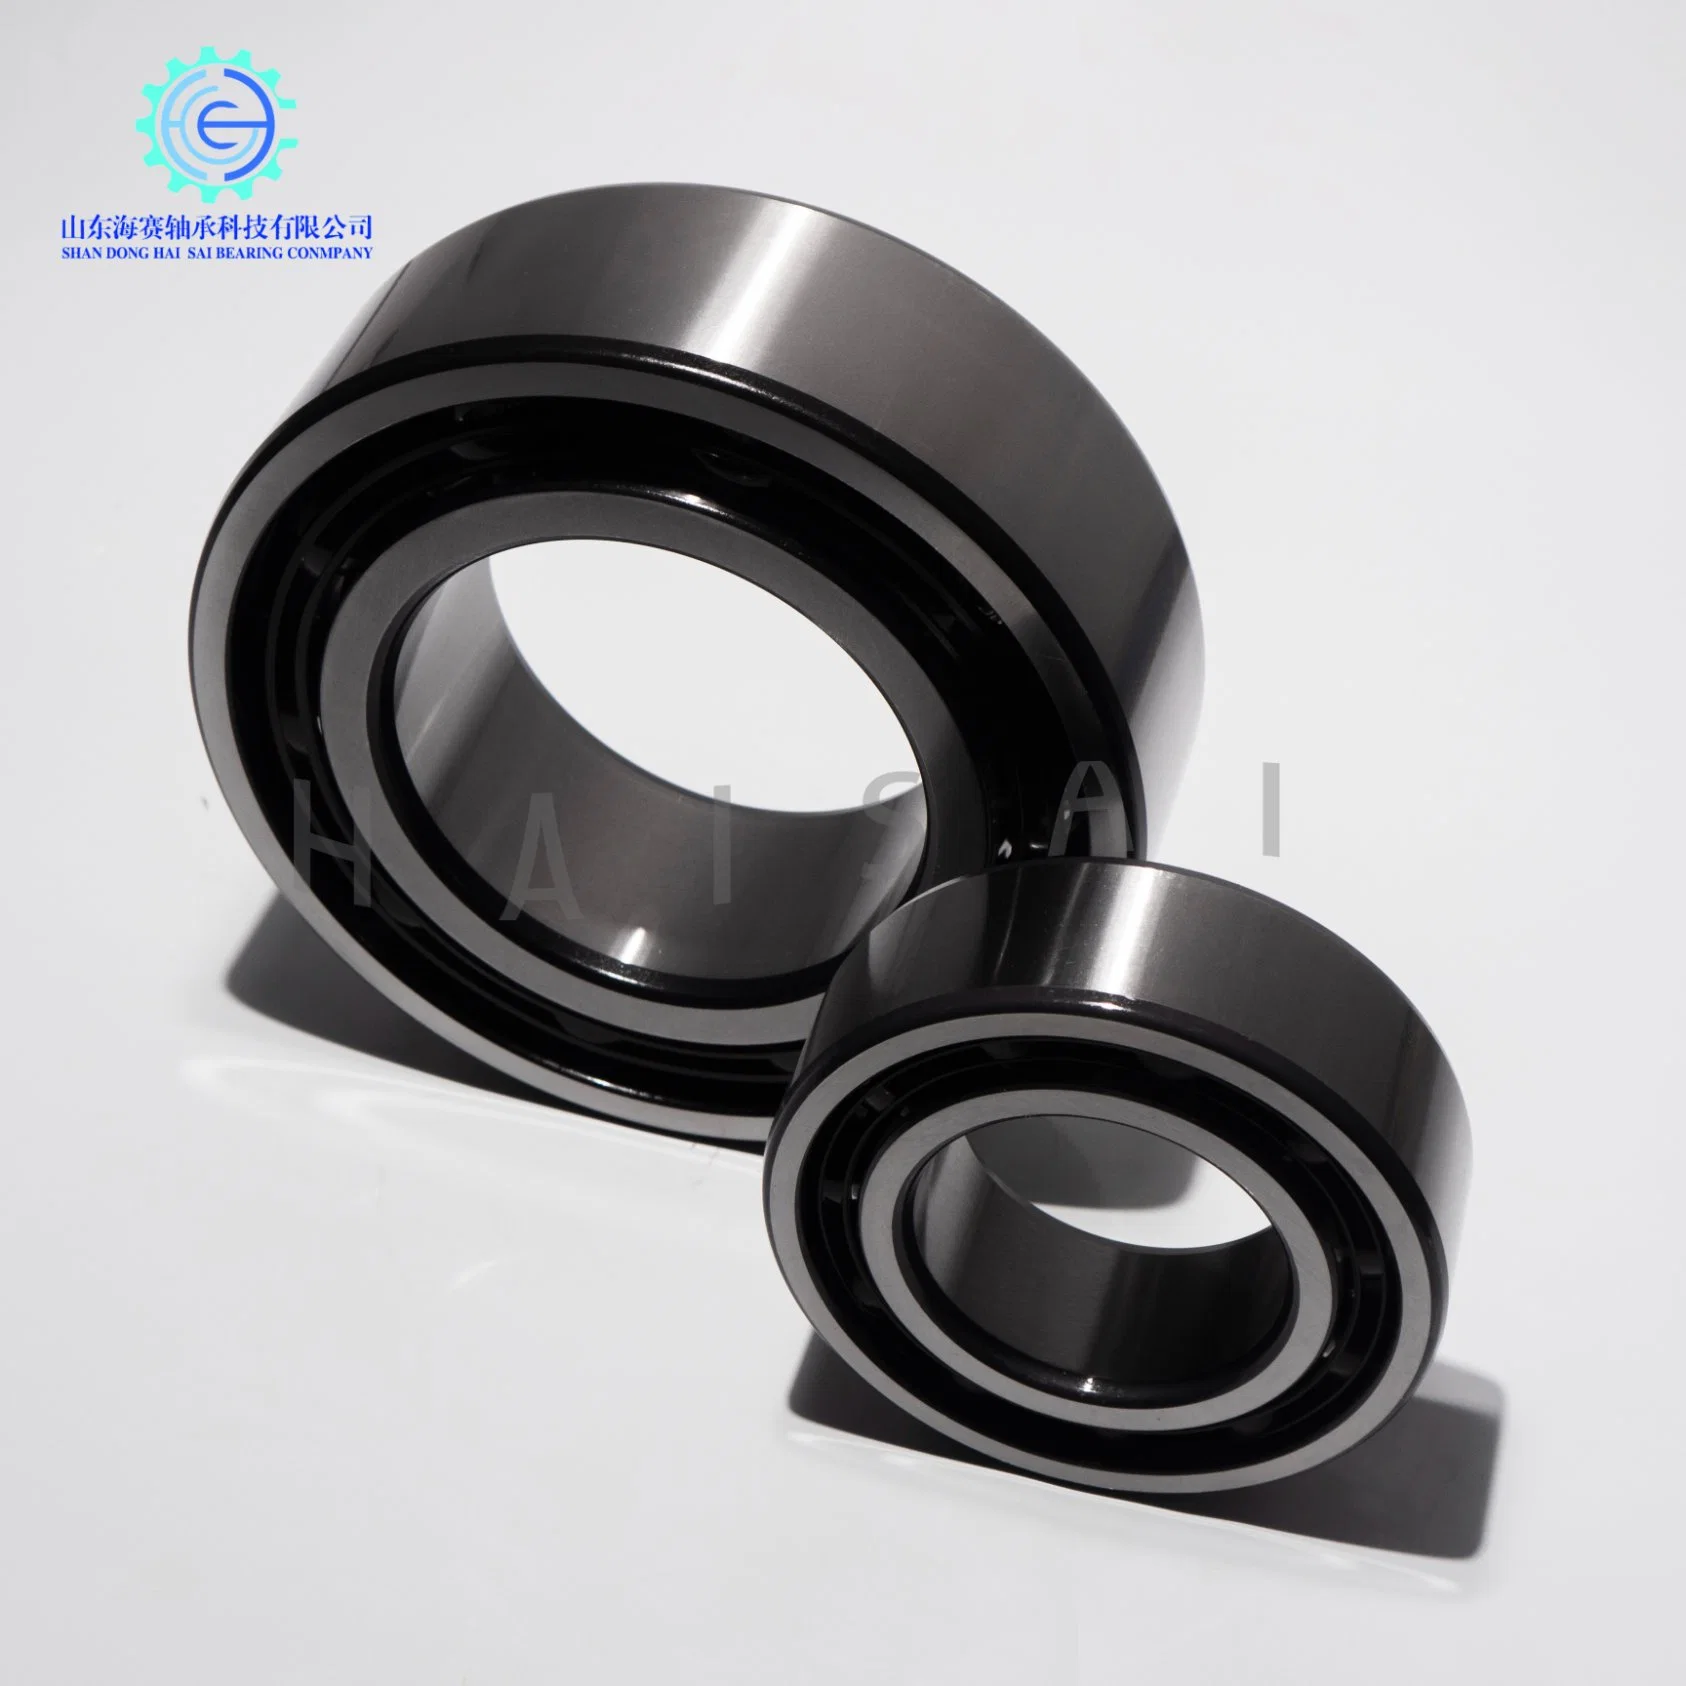 1688 High Performance 3212 3219 Double Row Angular Contact/Thrust Ball/Tapered/Cylindrical Rolling/Needle/Stainless Steel Bearing for Machine Parts